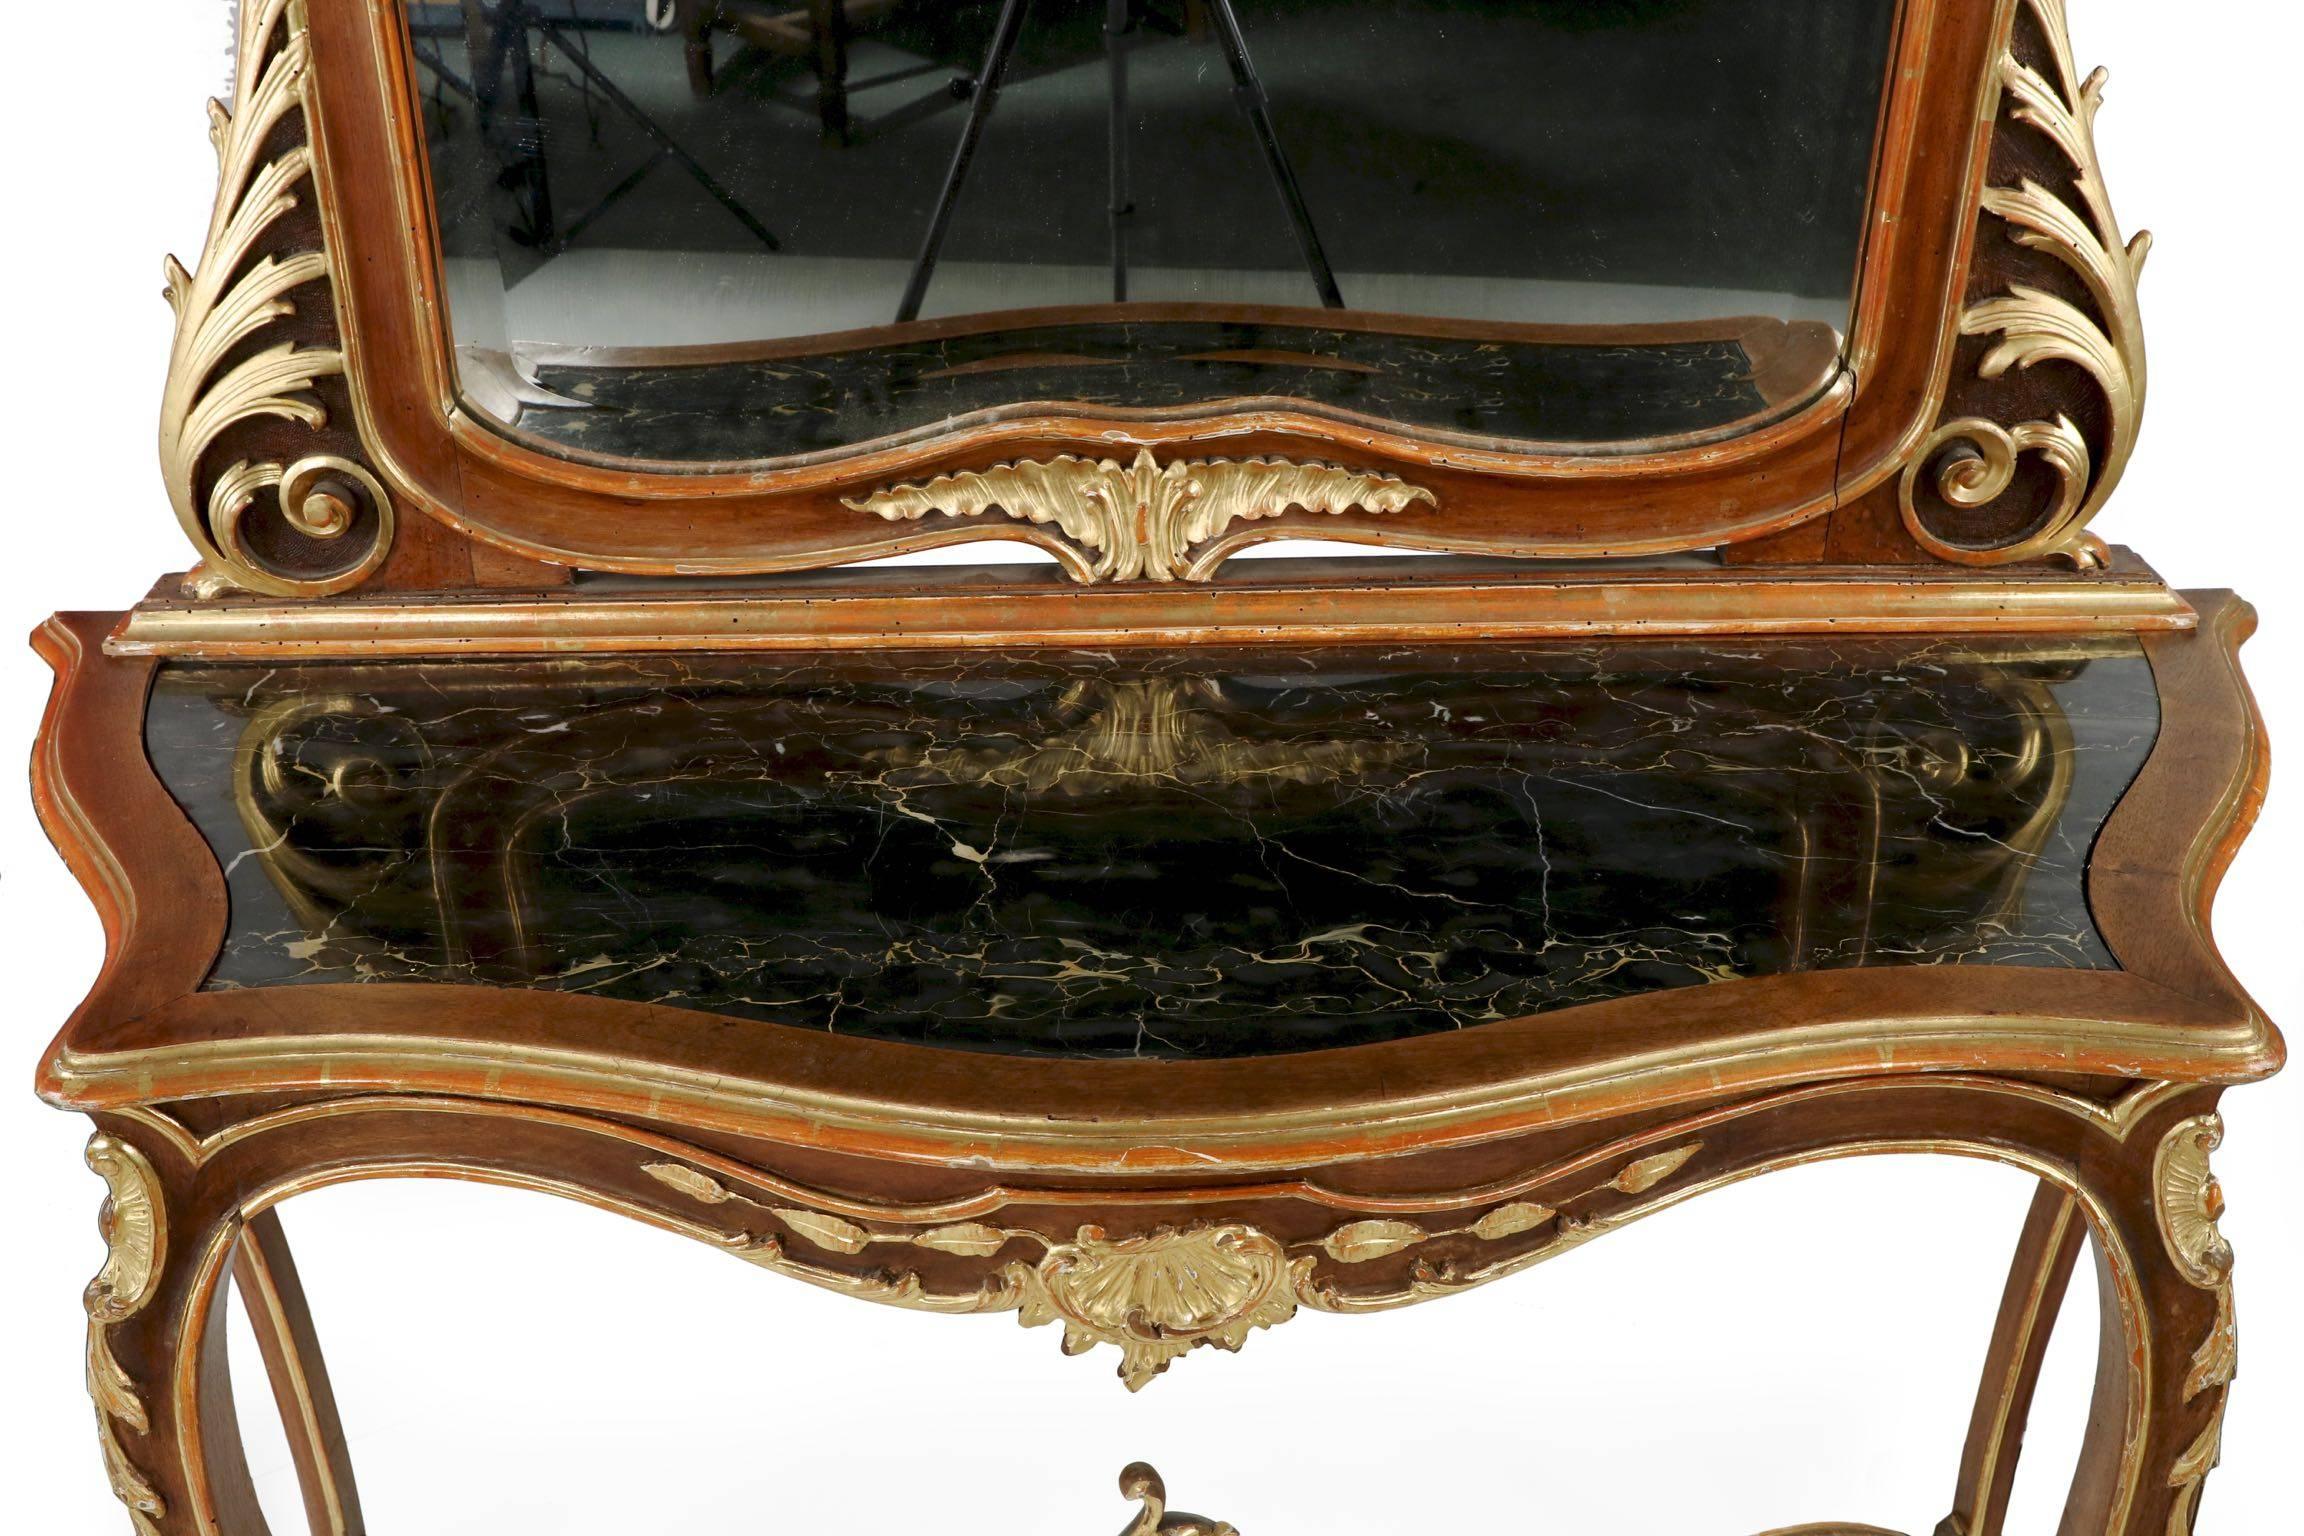 European Fine Rococo Carved and Gilded Walnut Pier Mirror and Console Table, 19th Century